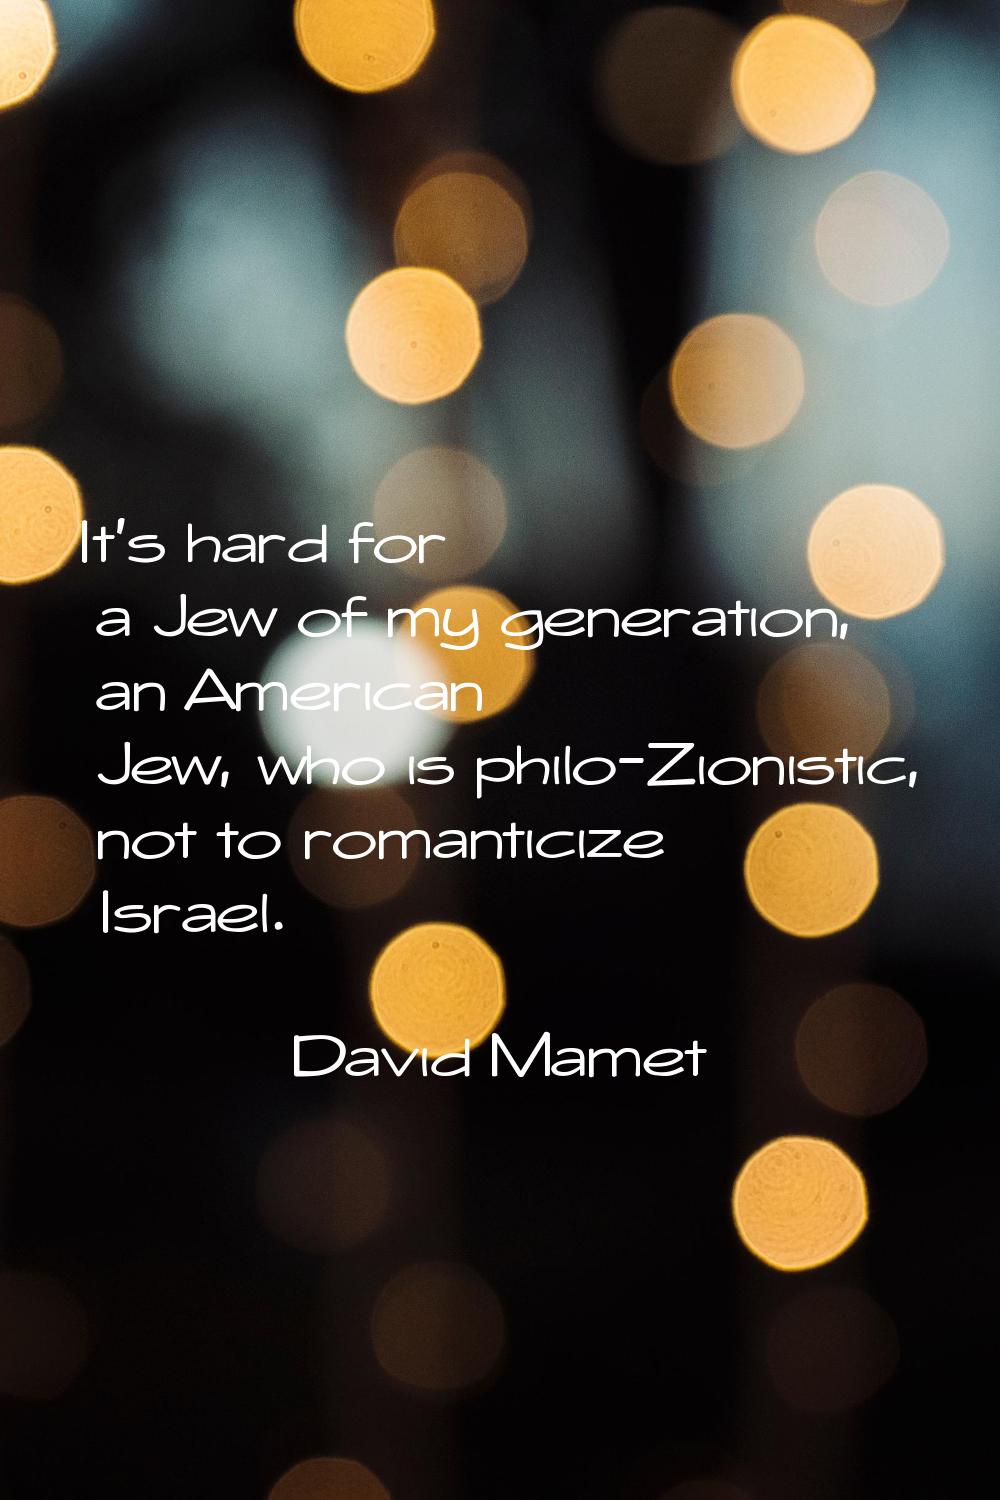 It's hard for a Jew of my generation, an American Jew, who is philo-Zionistic, not to romanticize I